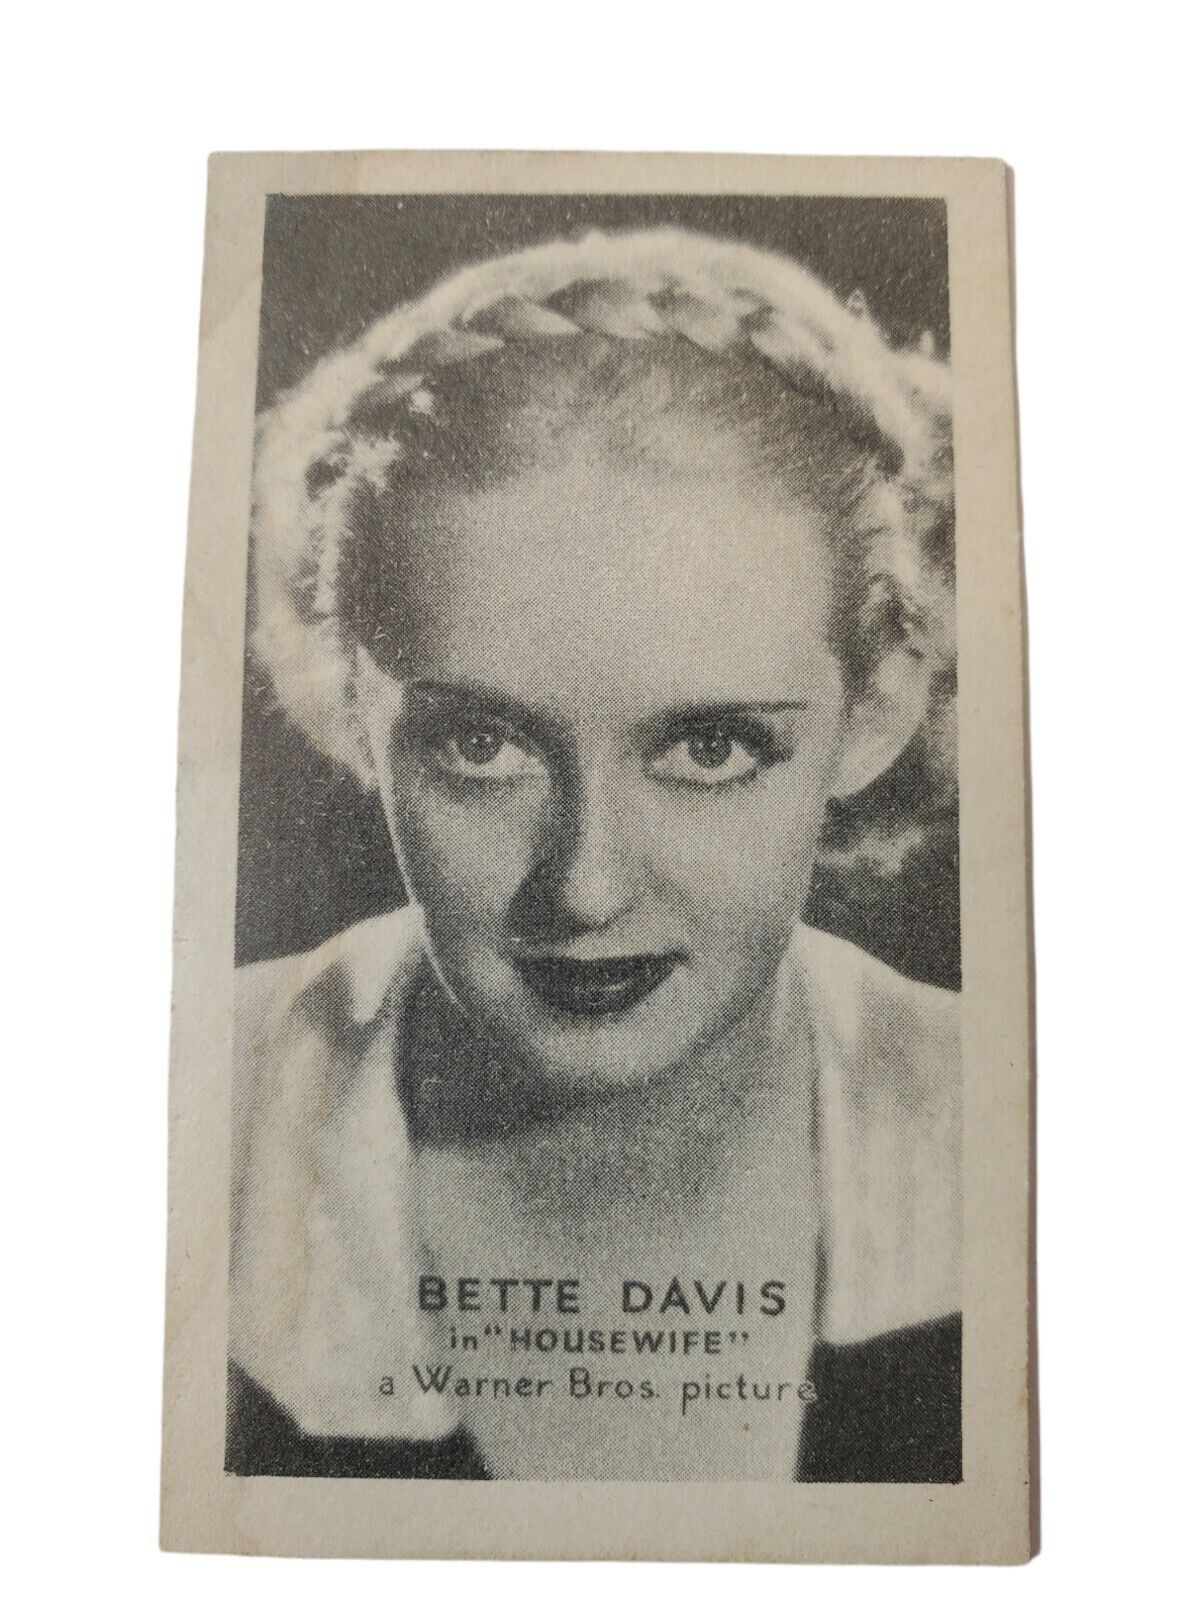 Betty Davis Tobacco Card 1930's T84 Golden Grain, Housewives nice as shown